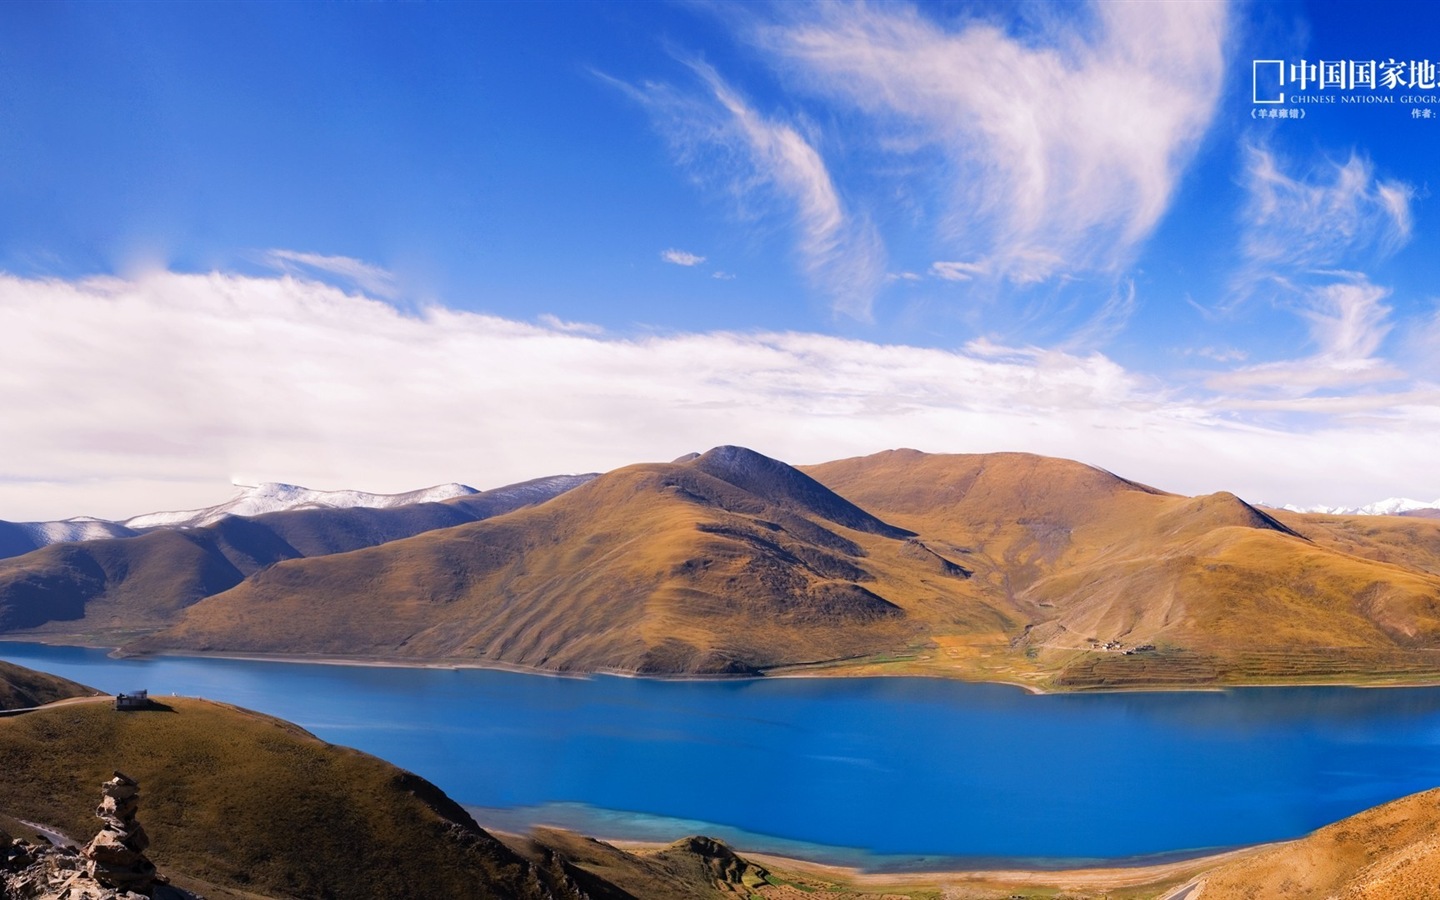 Chinese National Geographic HD landscape wallpapers #15 - 1440x900